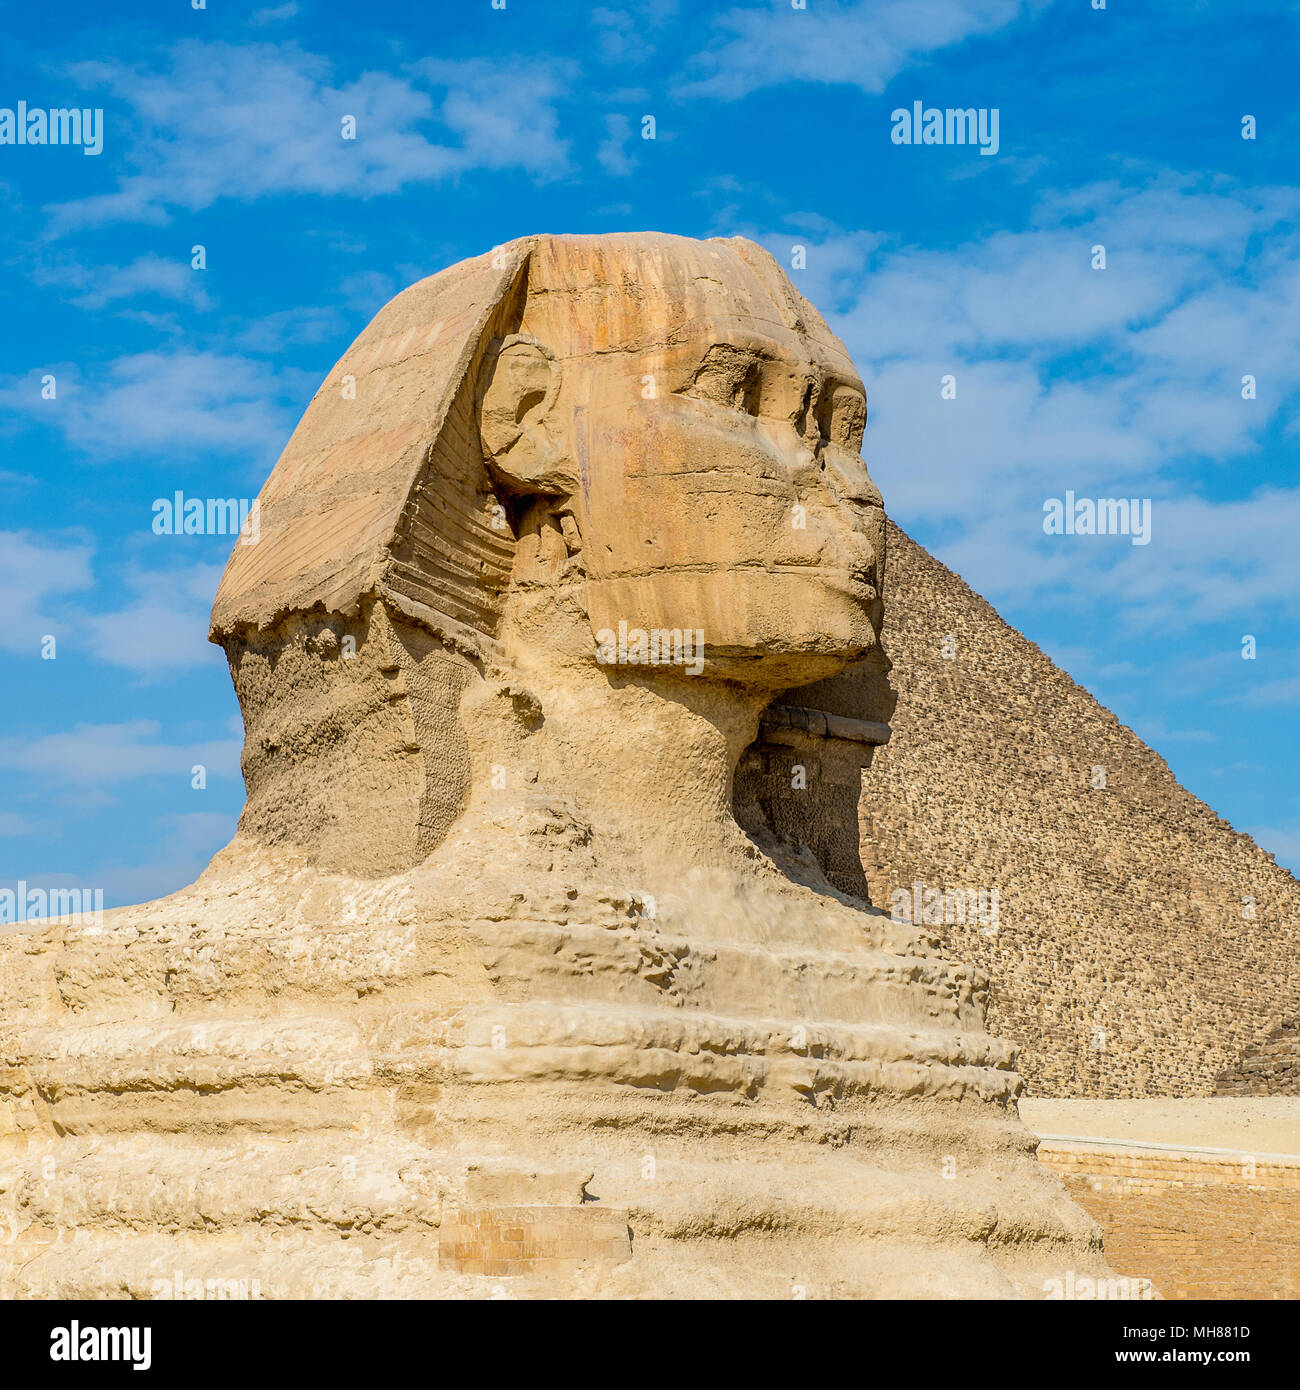 Great Sphinx of Giza, a limestone statue of a mythical creature with a ...